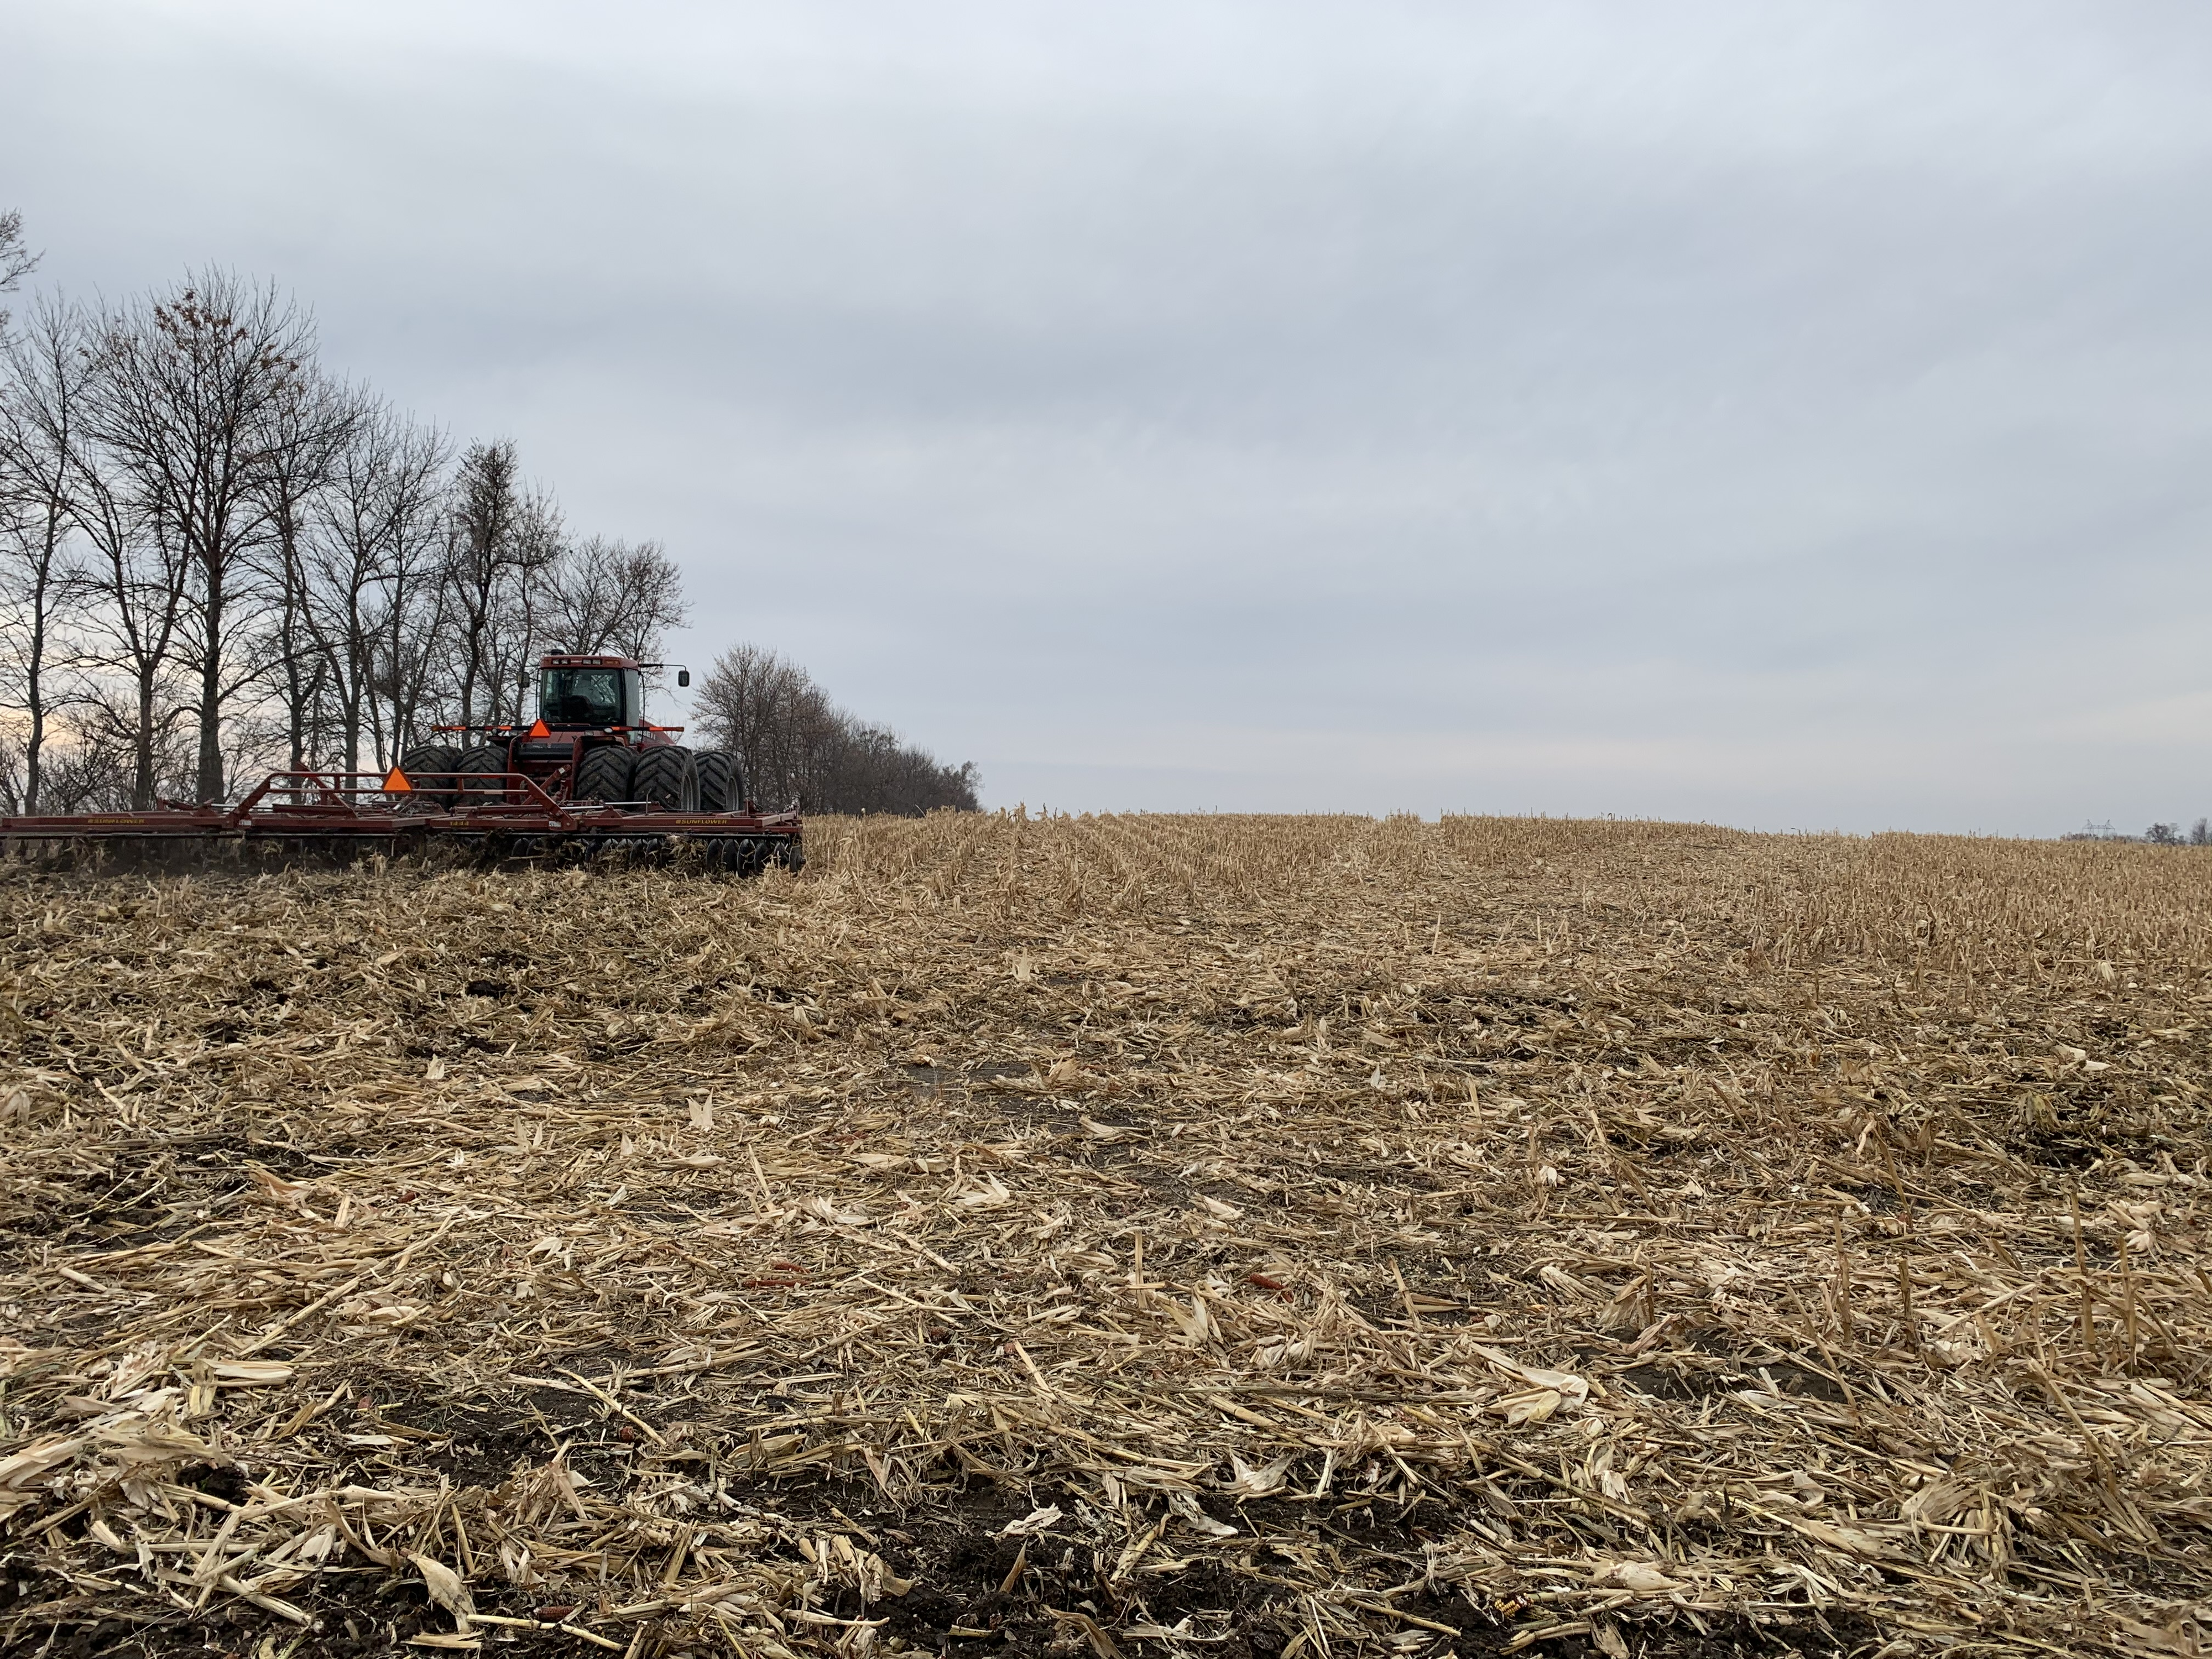 Afternoon Ag News, December 14, 2021: The U.S. farm economy continues to struggle with supply chain disruptions